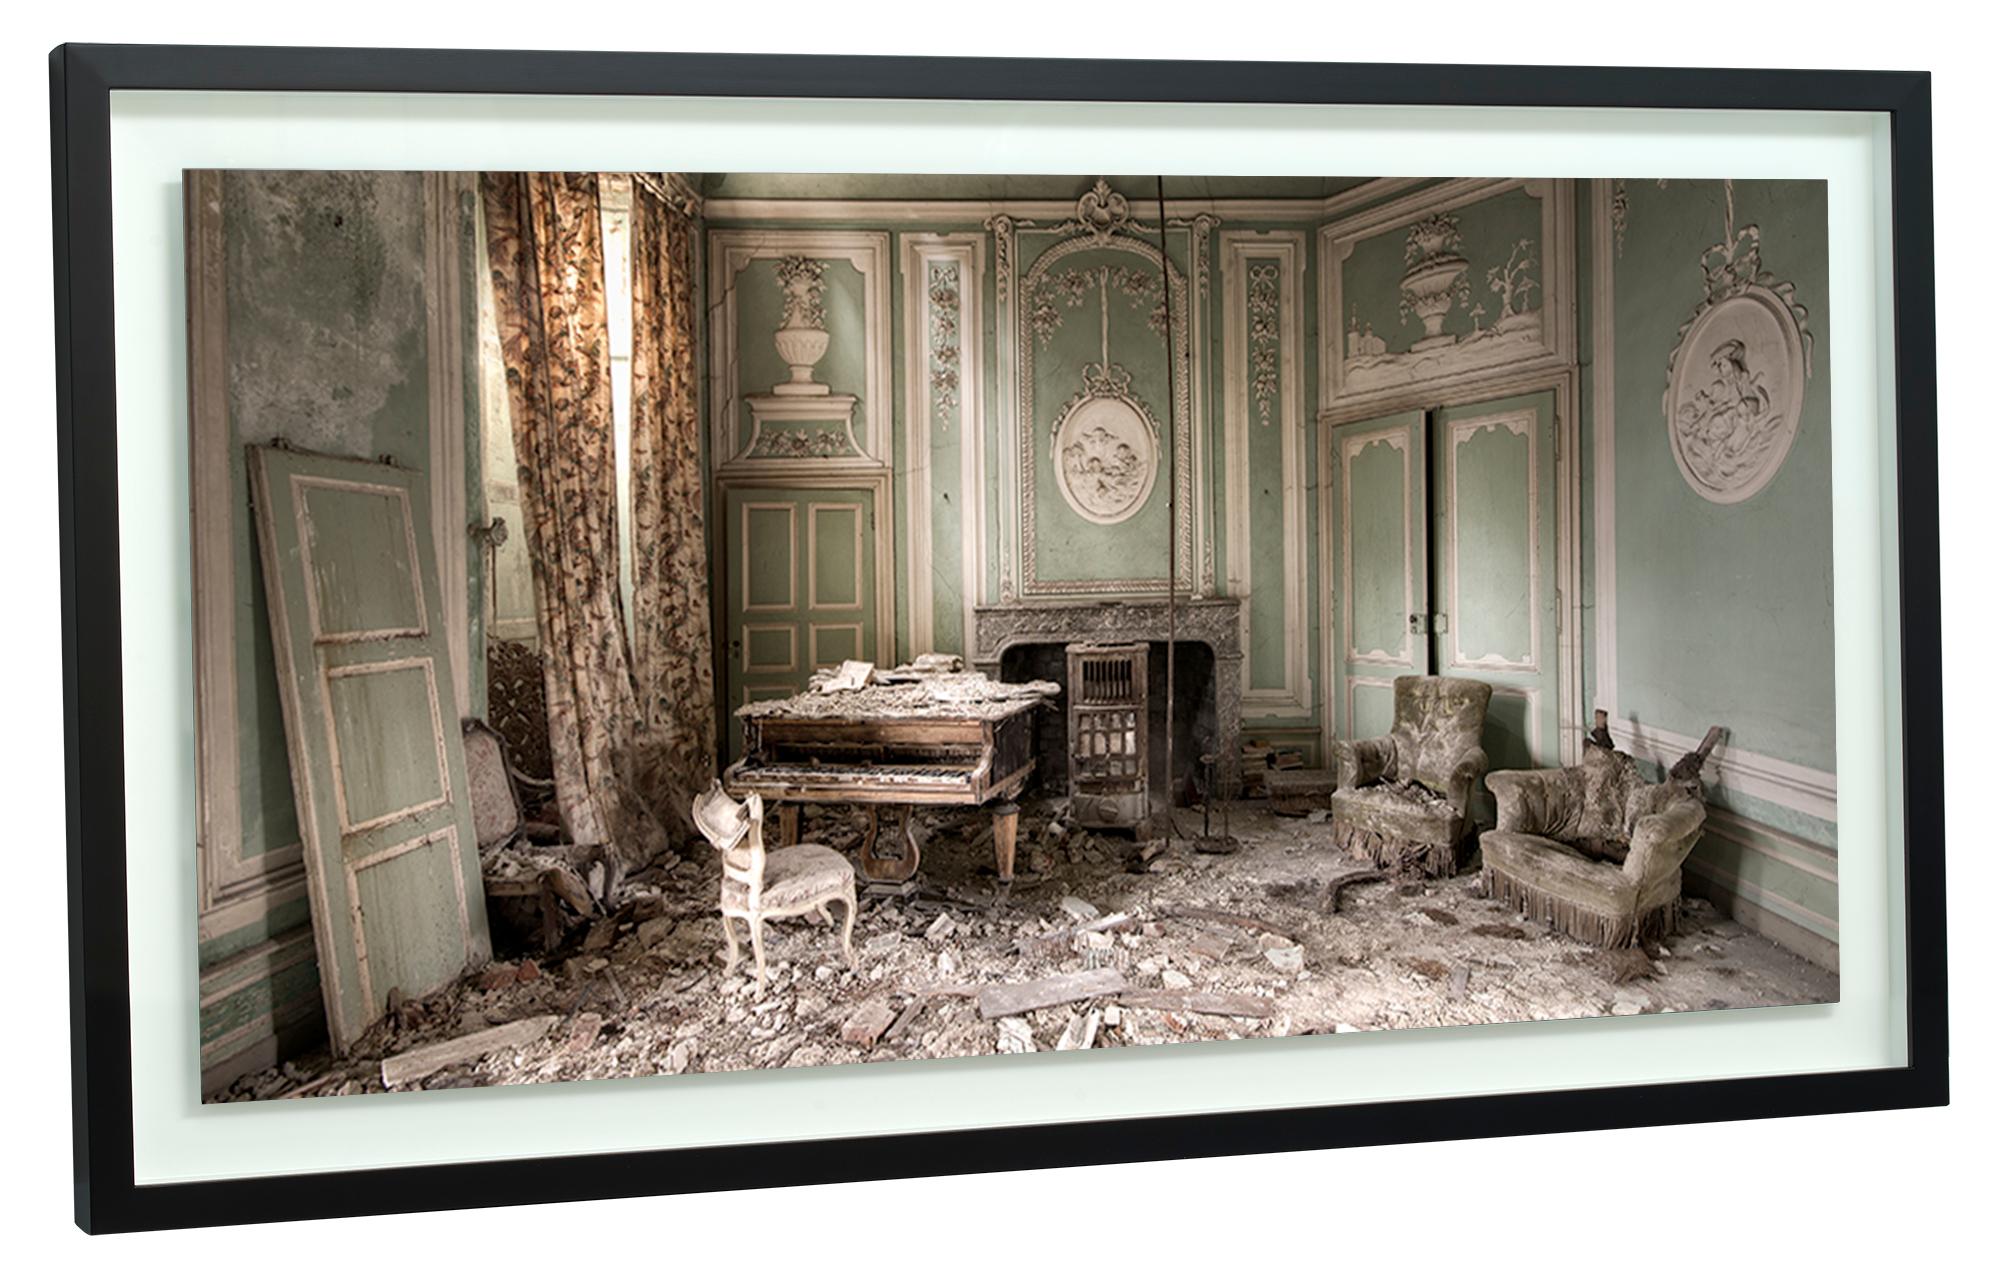 Tunes of Decay - Limited Edition of 5 pcs - Luxury framed with Museum Glass - Gray Color Photograph by Daan Oude Elferink